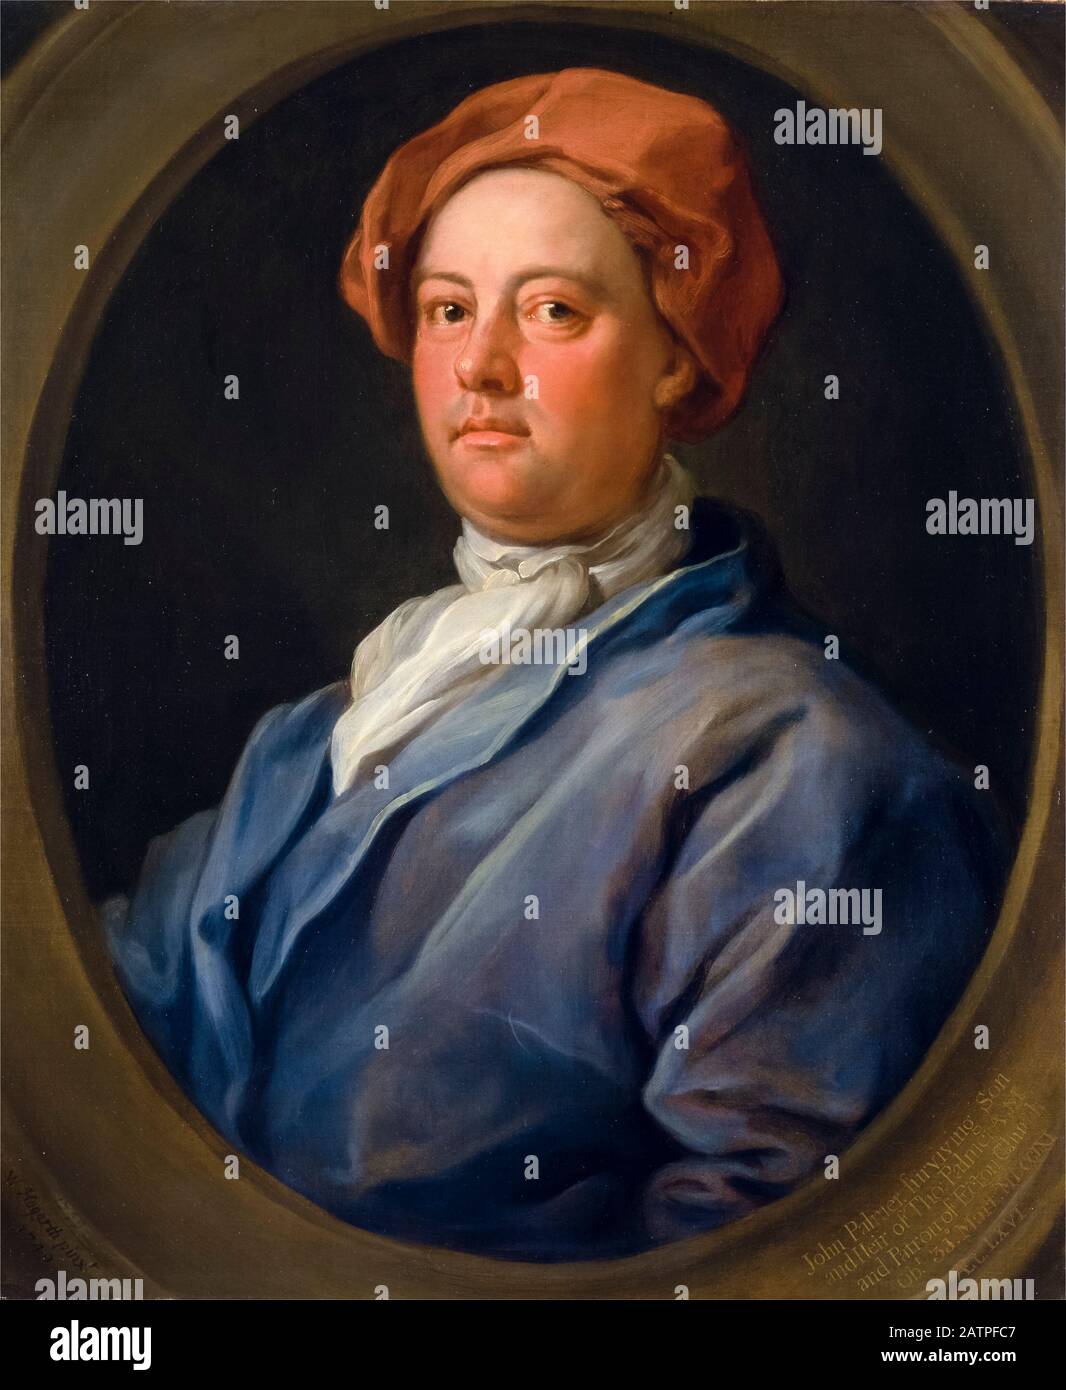 John Palmer, Barrister of the Inner Temple, portrait painting by William Hogarth, 1749 Stock Photo